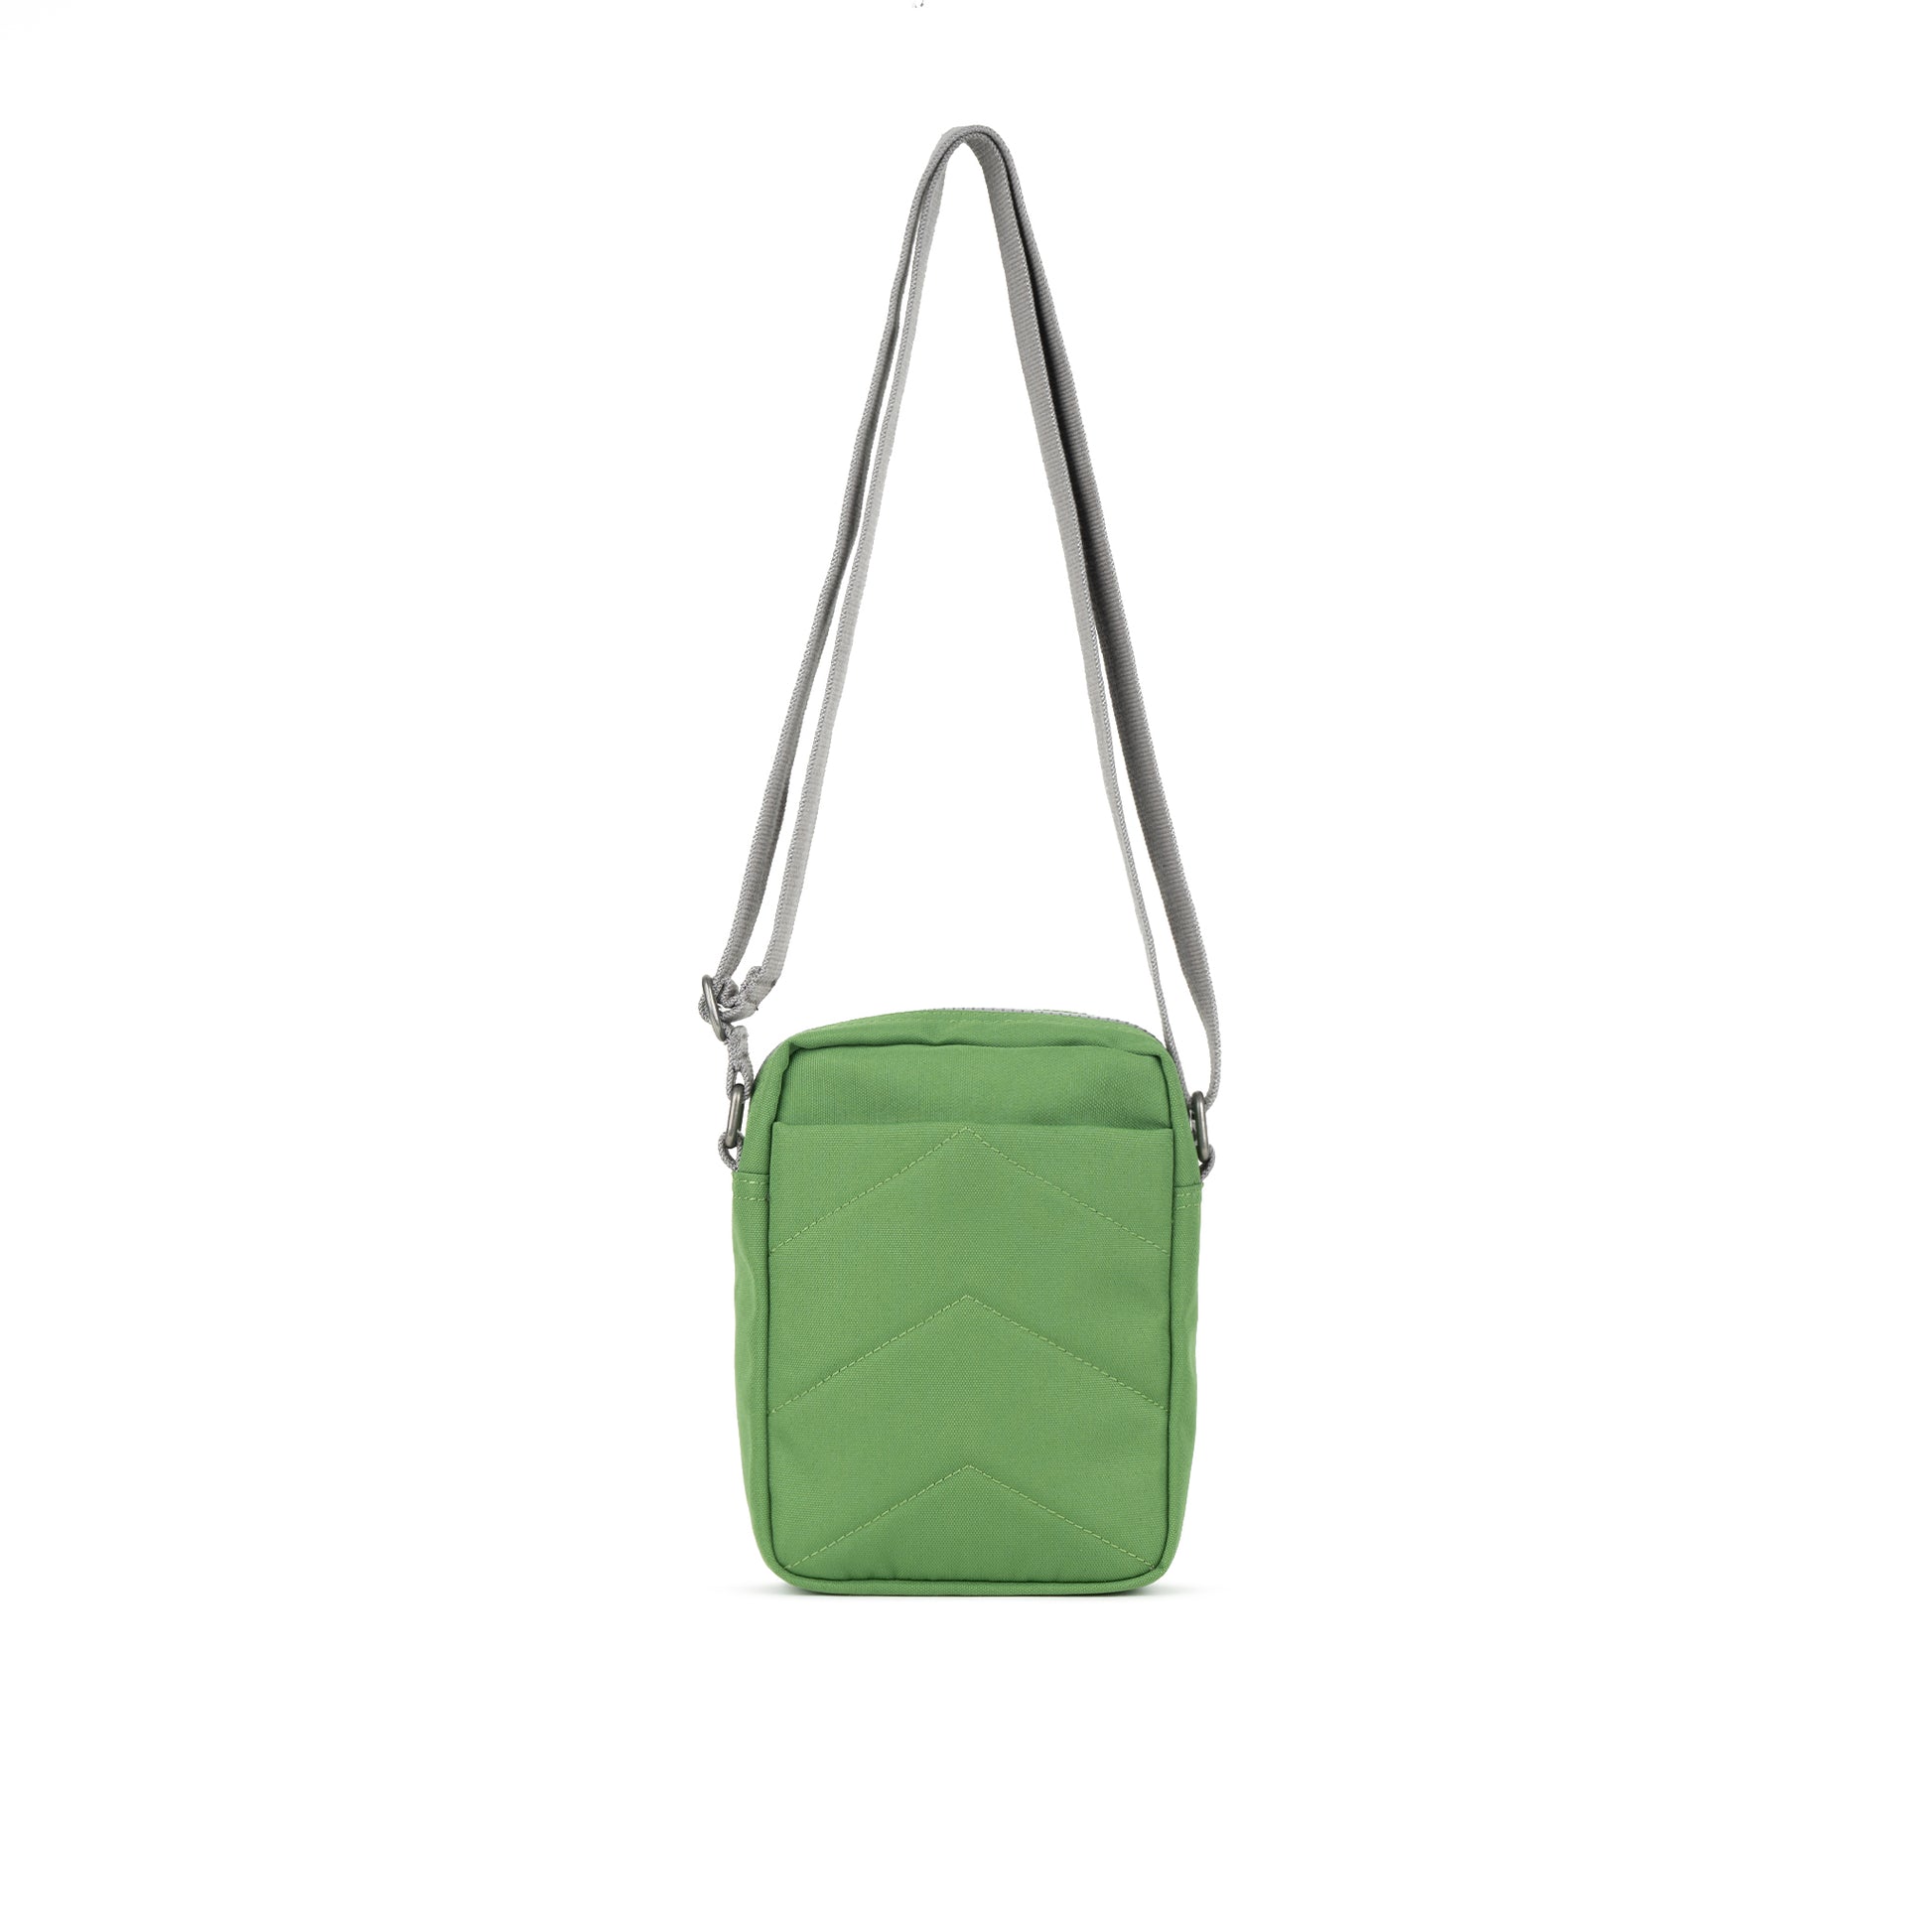 Conker Boutique Roka Bond sustainable Bag in Foliage